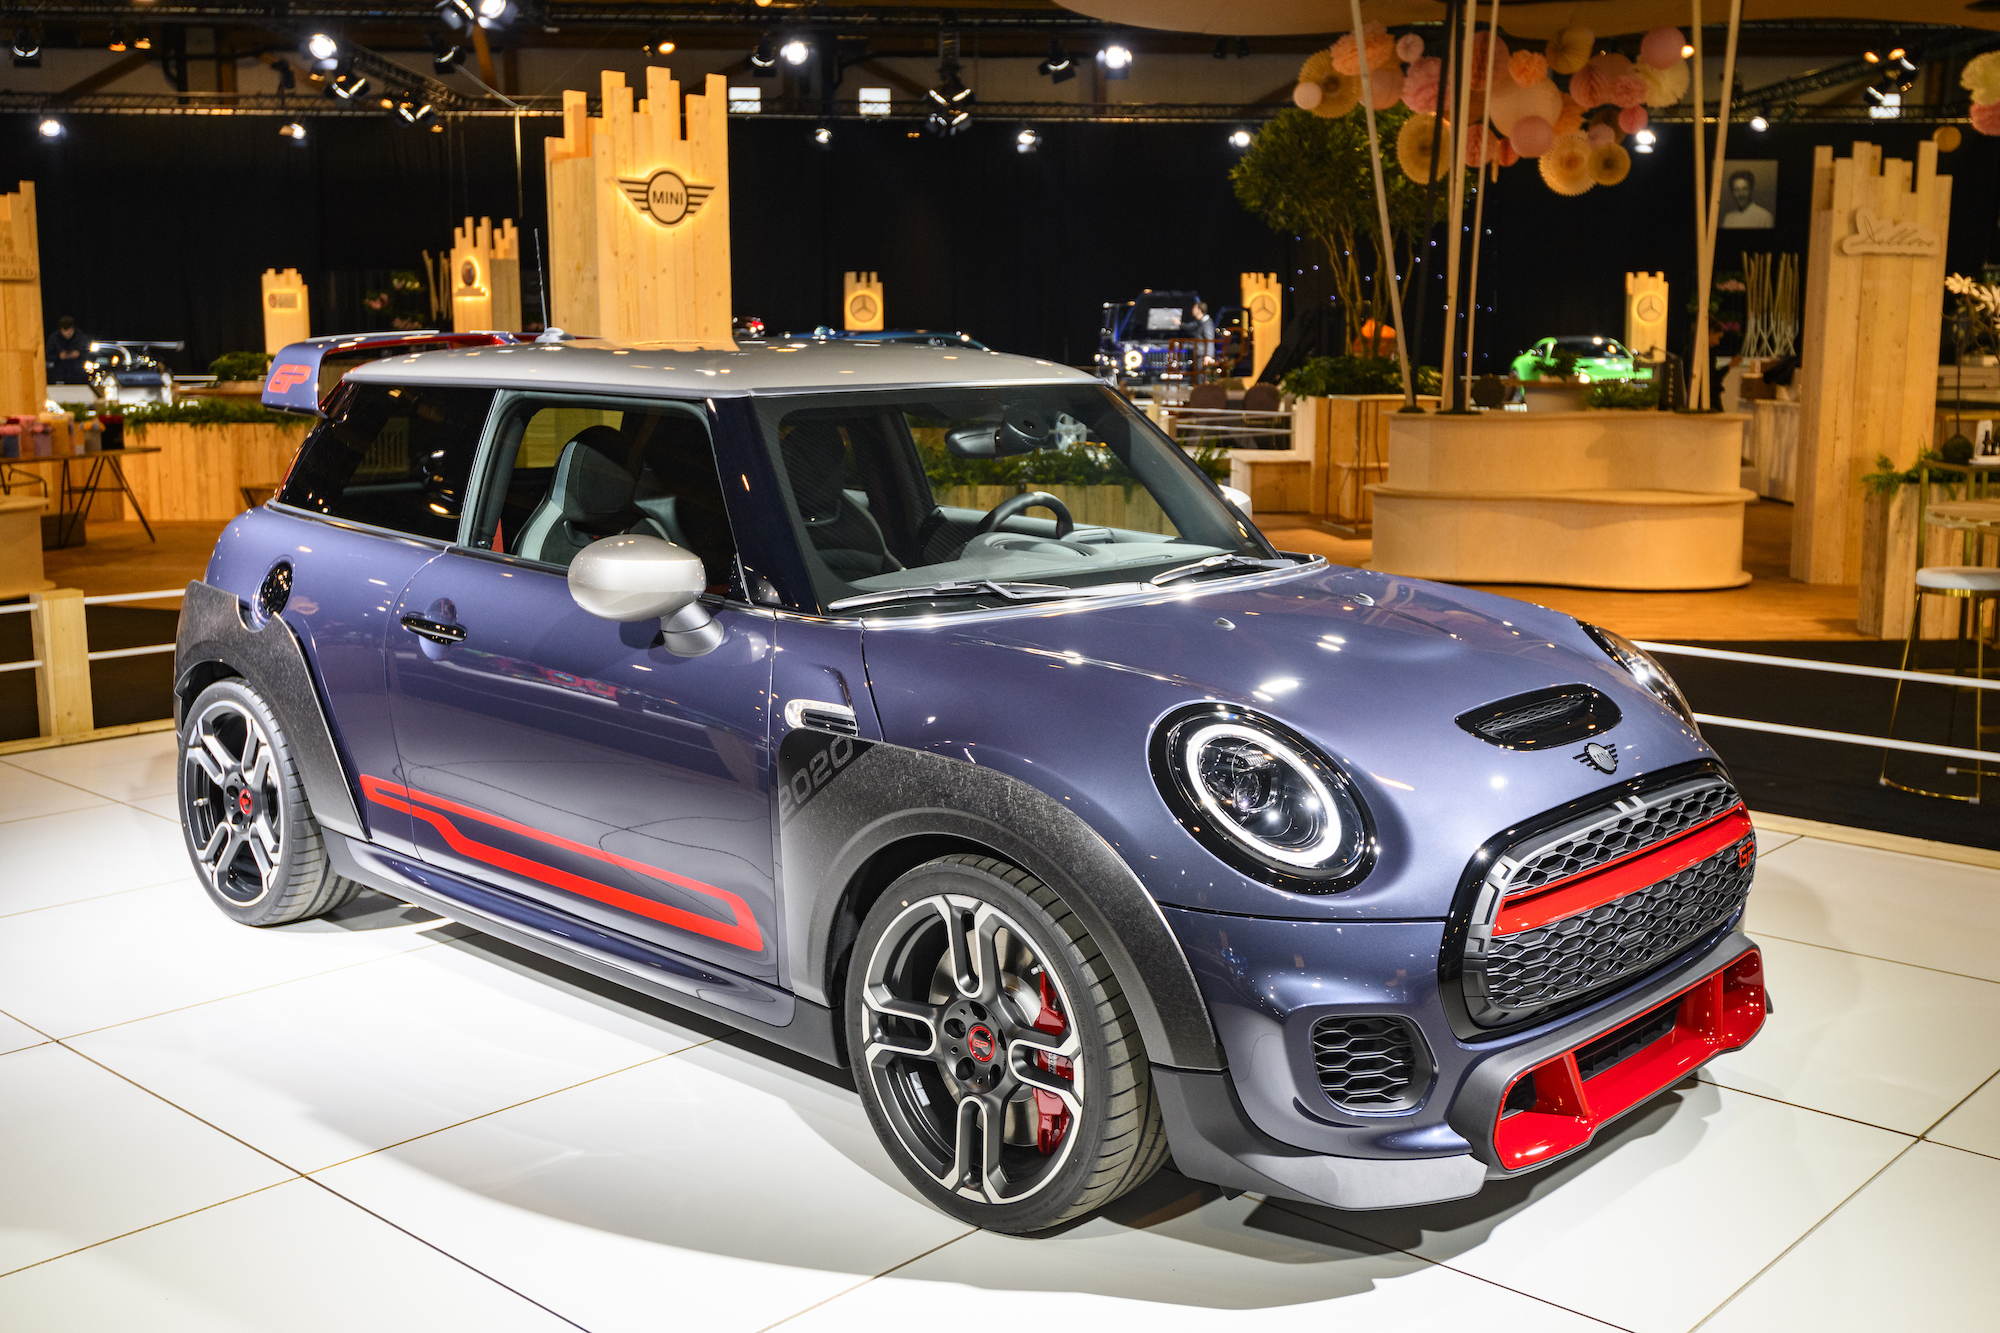 A blue and red 2020 Mini Cooper John Cooper Works subcompact car on display at Brussels Expo on January 9, 2020, in Brussels, Belgium